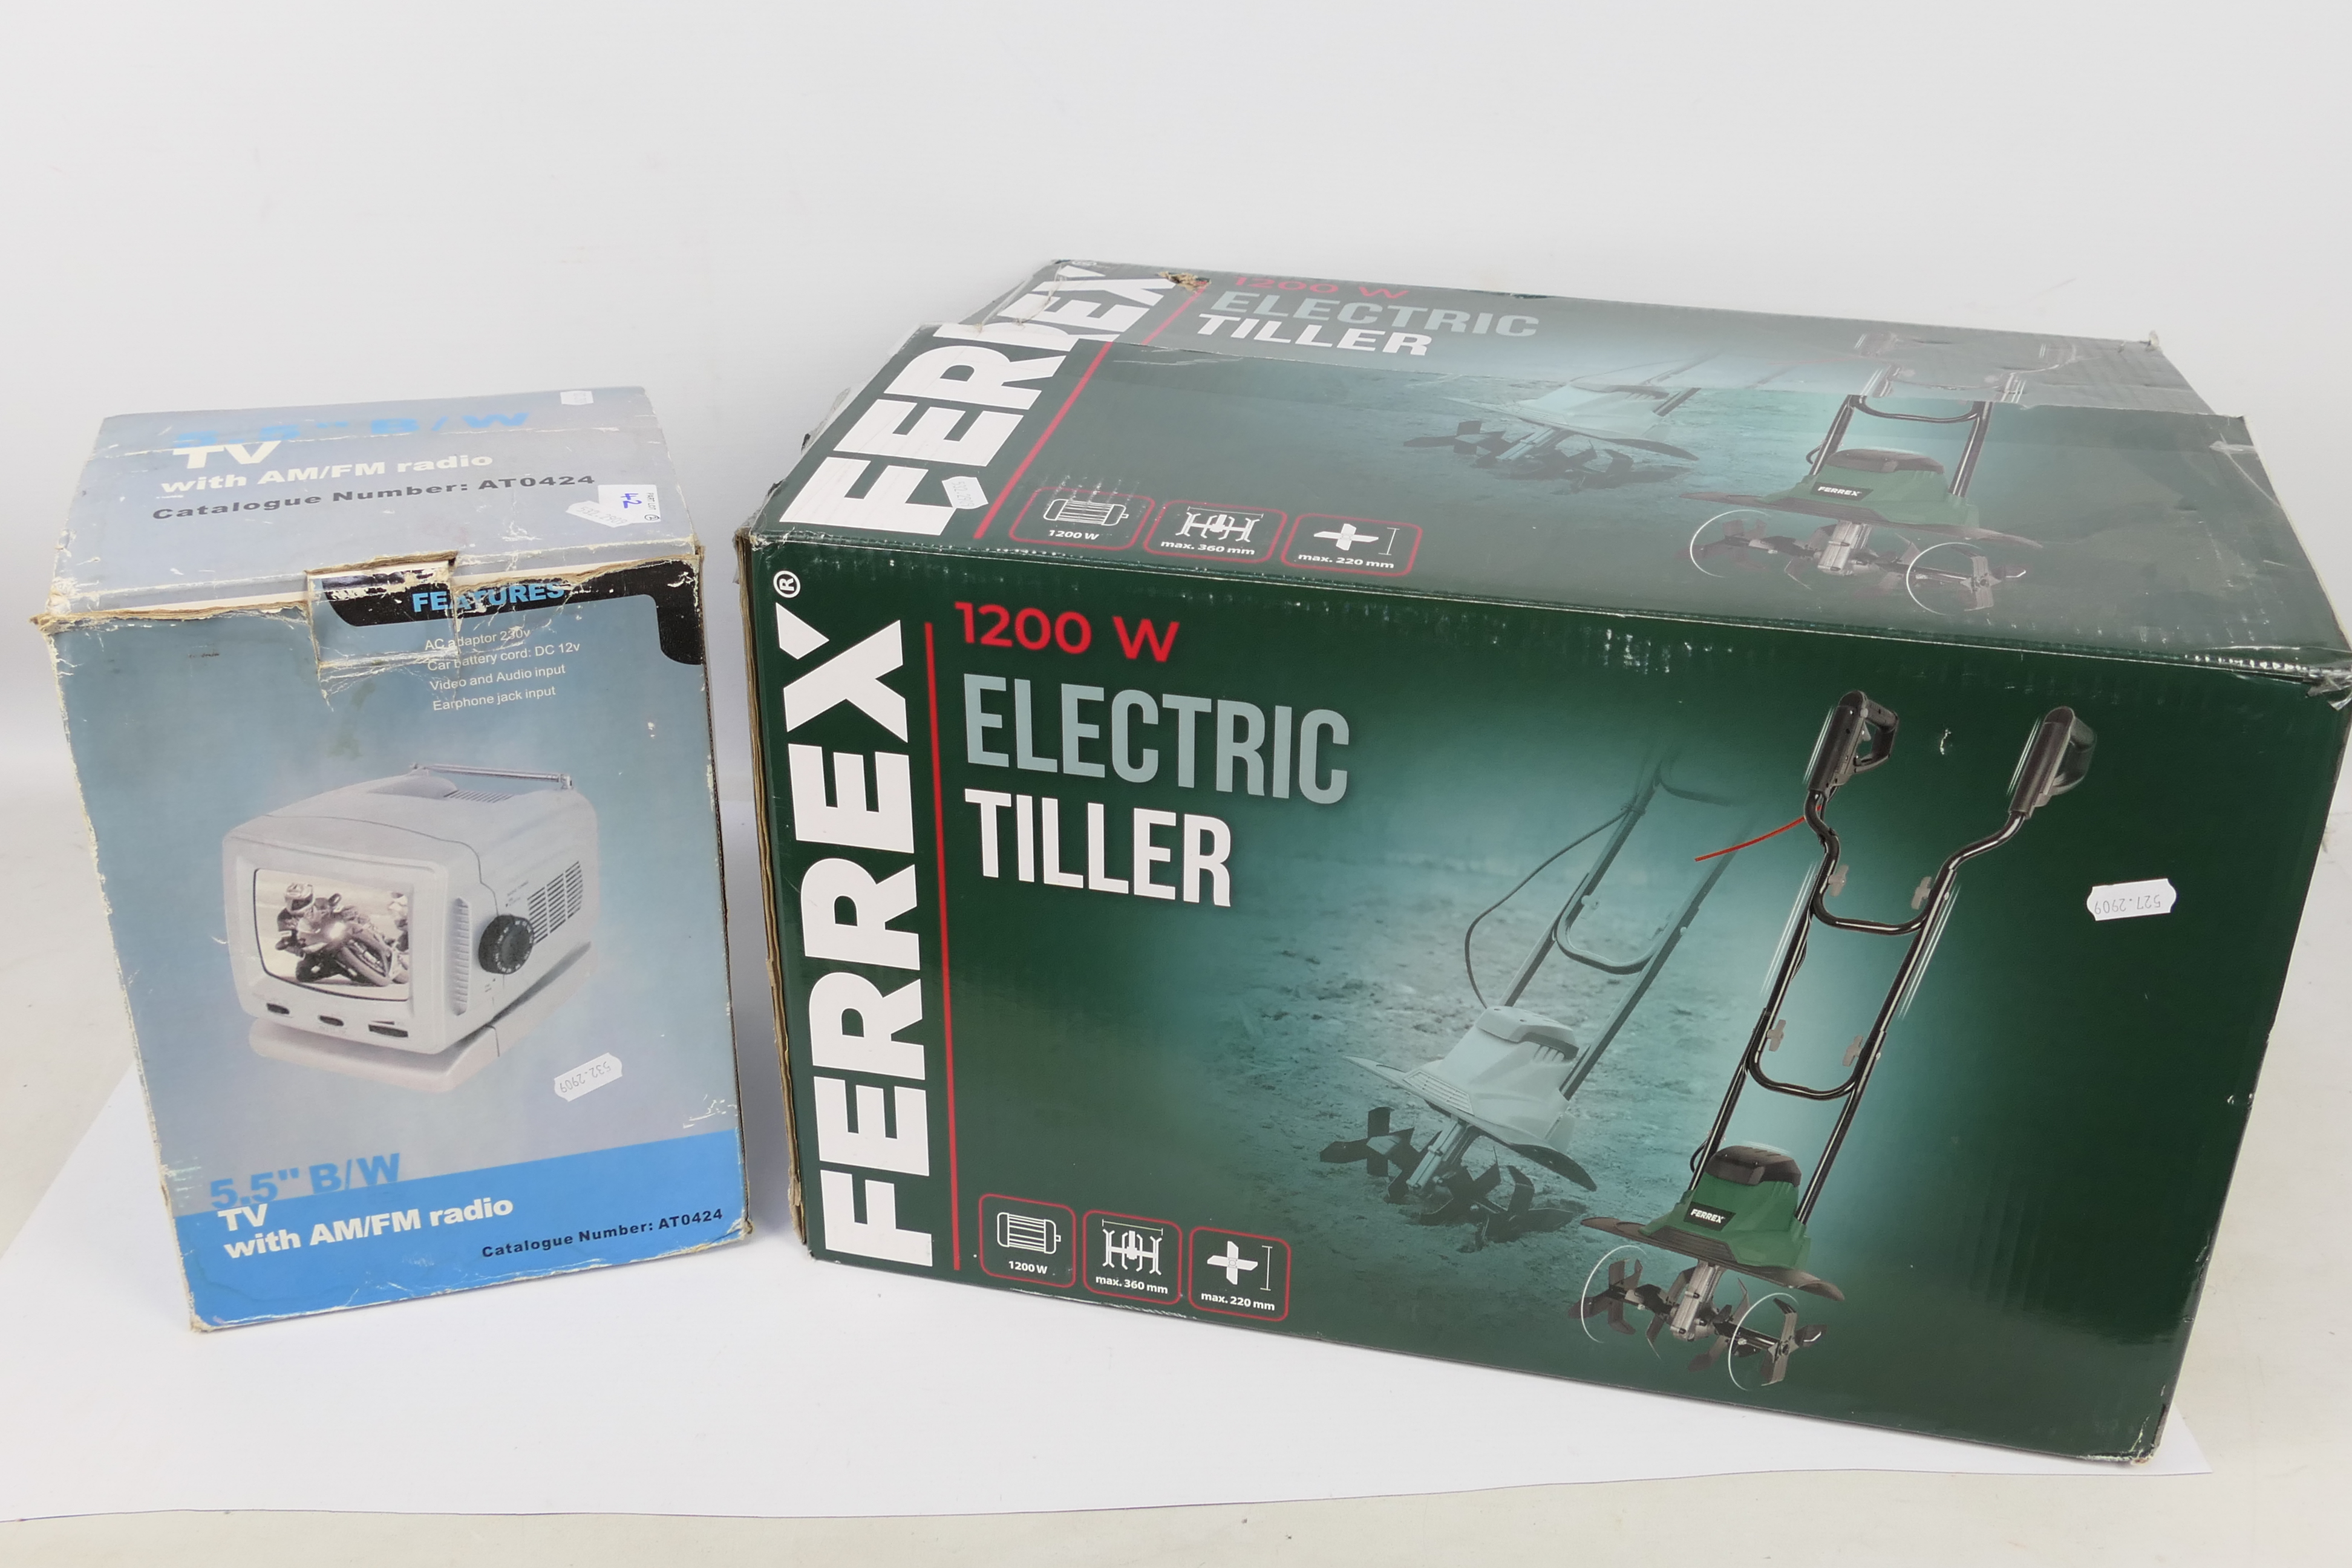 A Ferrex 1200 w Electric Tiller contained in original box appearing unused and a boxed portable